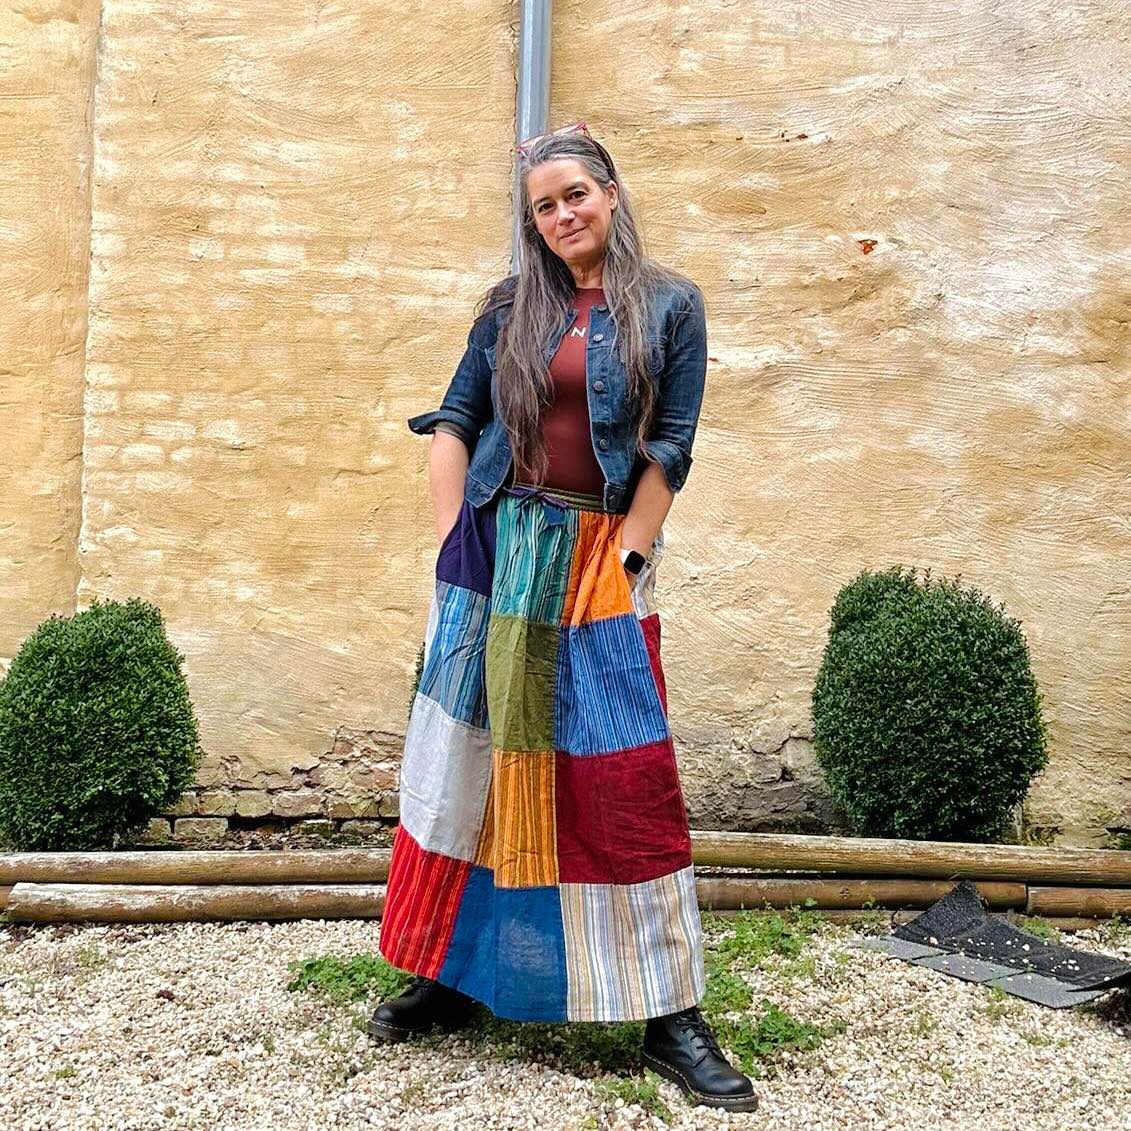 Bohemian Patchwork Cotton Skirt with Pockets